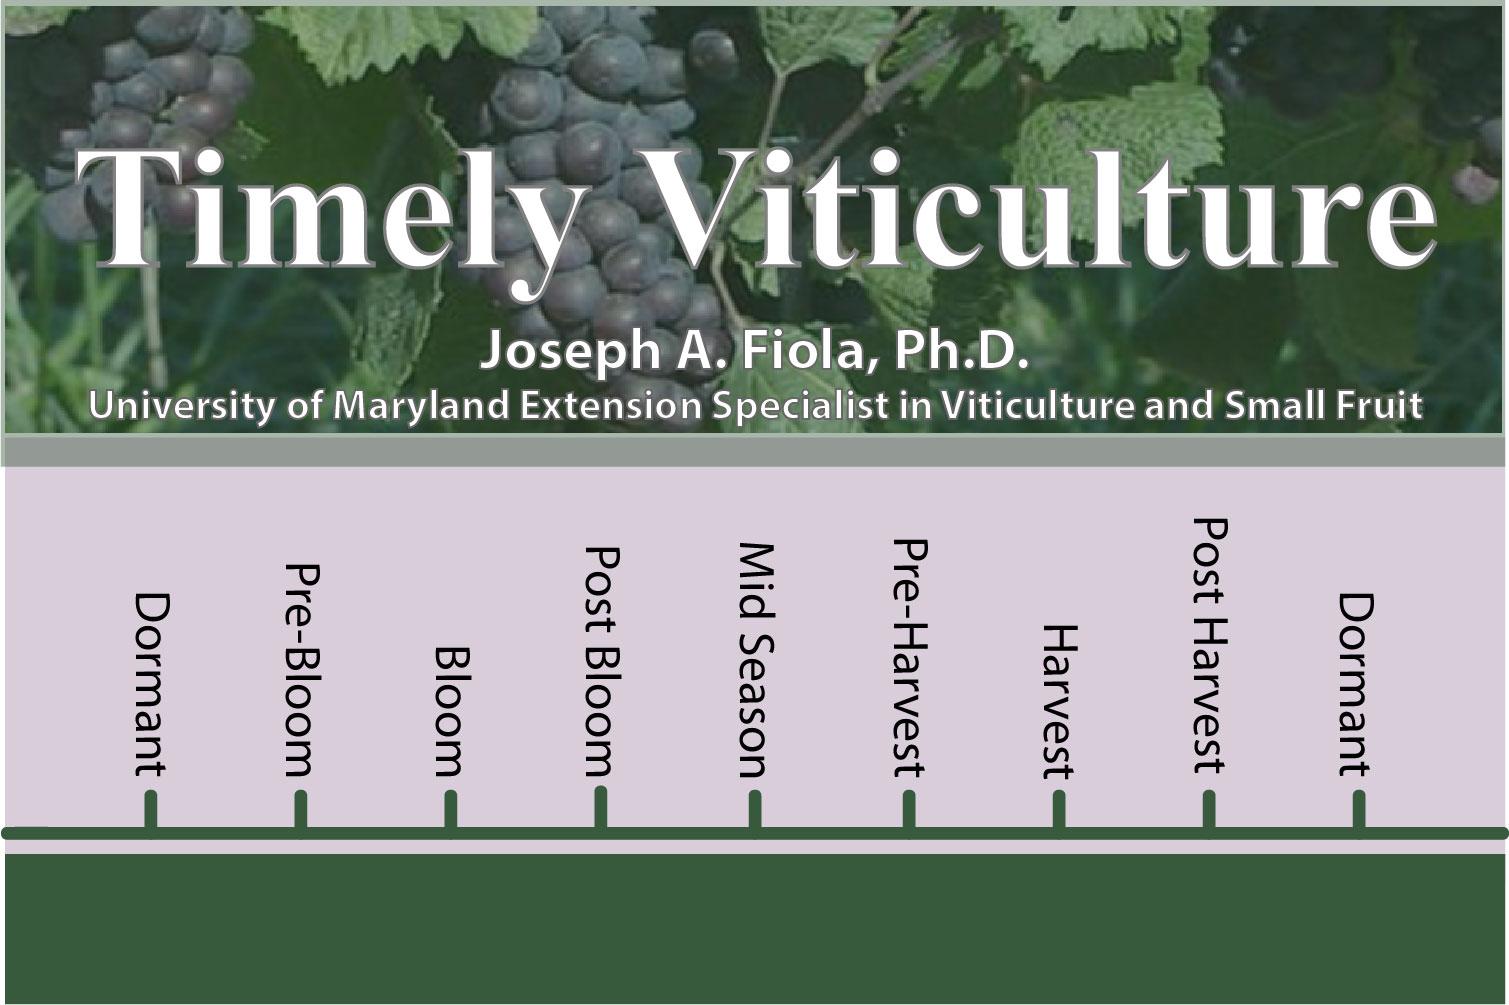 Timely Viticulture Timeline